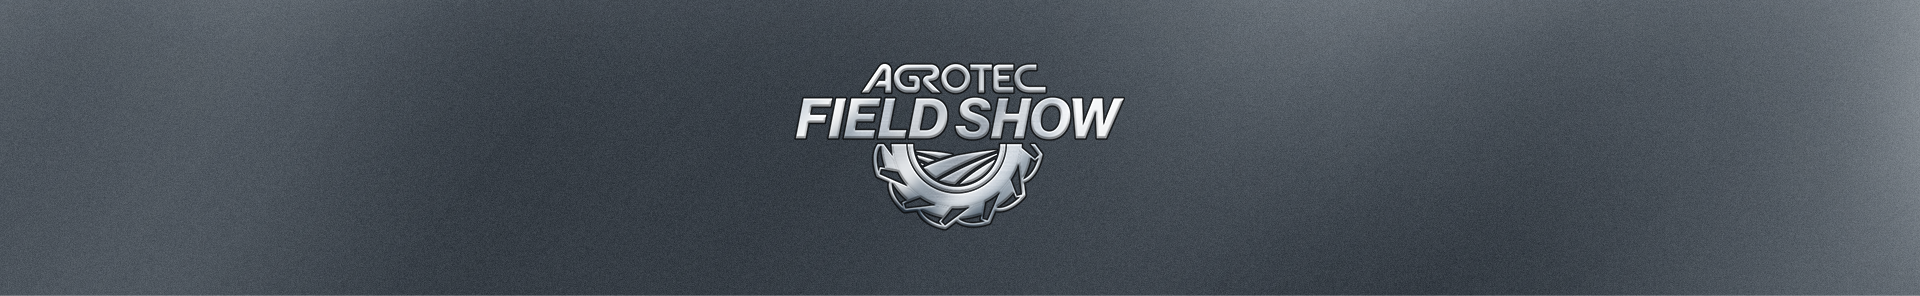 logo field show - agrotec